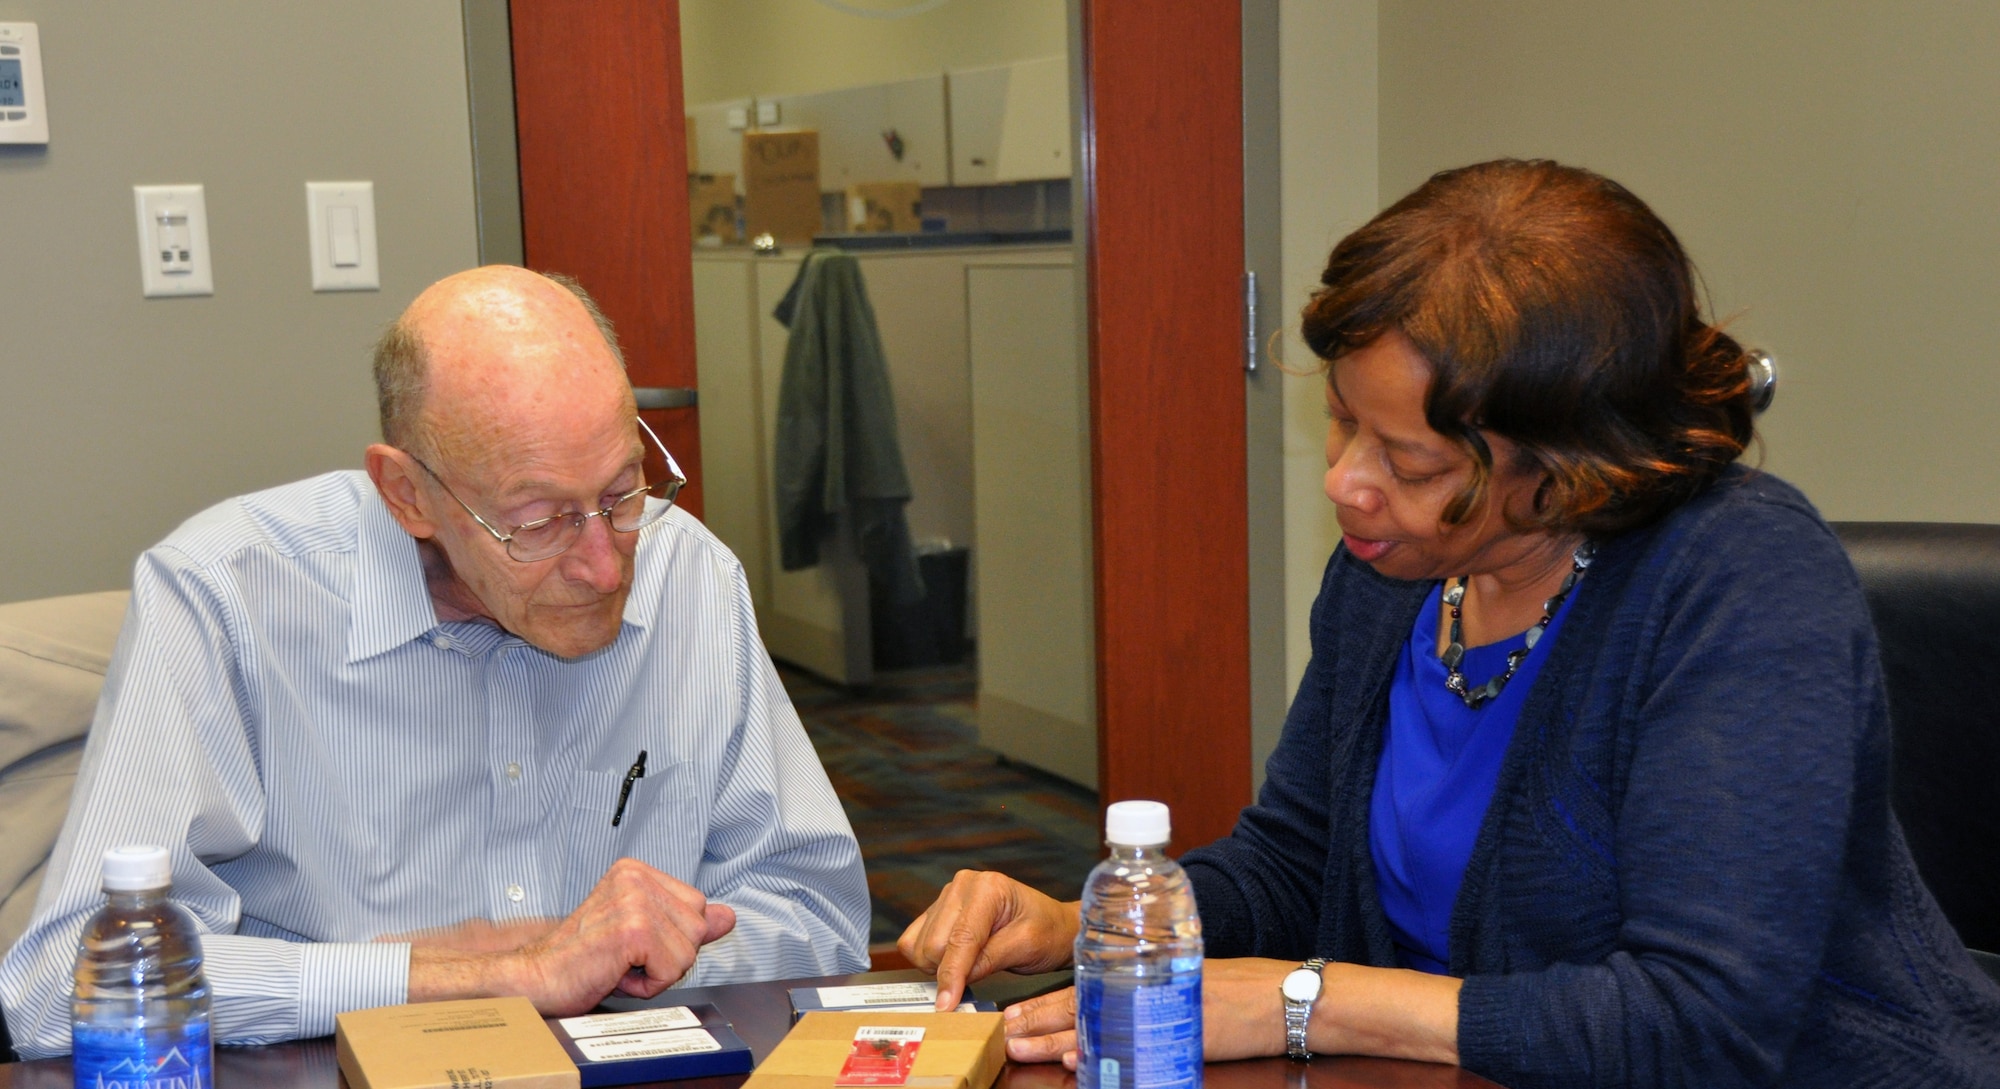 Former 1st Lt. Clayton A. Nattier, a veteran bomber pilot who was held as a prisoner of war during World War II, goes over the medals he received from the Air Reserve Personnel Center with Jacqueline Bing, sustainment division chief, April 17, 2015, on Buckley Air Force Base, Colo. Nattier visited ARPC to receive his POW Medal among various other medals, then took time to personally meet and thank the members on the recognition service team who assisted him. Along with Bing, other members from the ARPC recognition service team who assisted Nattier are: retired Brig. Gen. Pat Quisenberry, evaluations branch chief, Master Sgt. Jeremy Bohn, pre-trained individual manpower division chief, and Master Sgt. Richard Grybos, NCO in charge of training and development. Nattier worked in conjunction with retired Lt. Col. Kathryn Wirkus, a constituent service representative from U.S. representative Ed Perlmutter’s staff, to attain his POW Medal. A formal presentation to award the POW Medal to Nattier is currently being planned by U.S. representative Ed Perlmutter’s office. (U.S. Air Force photo/Tech. Sgt. Rob Hazelett)